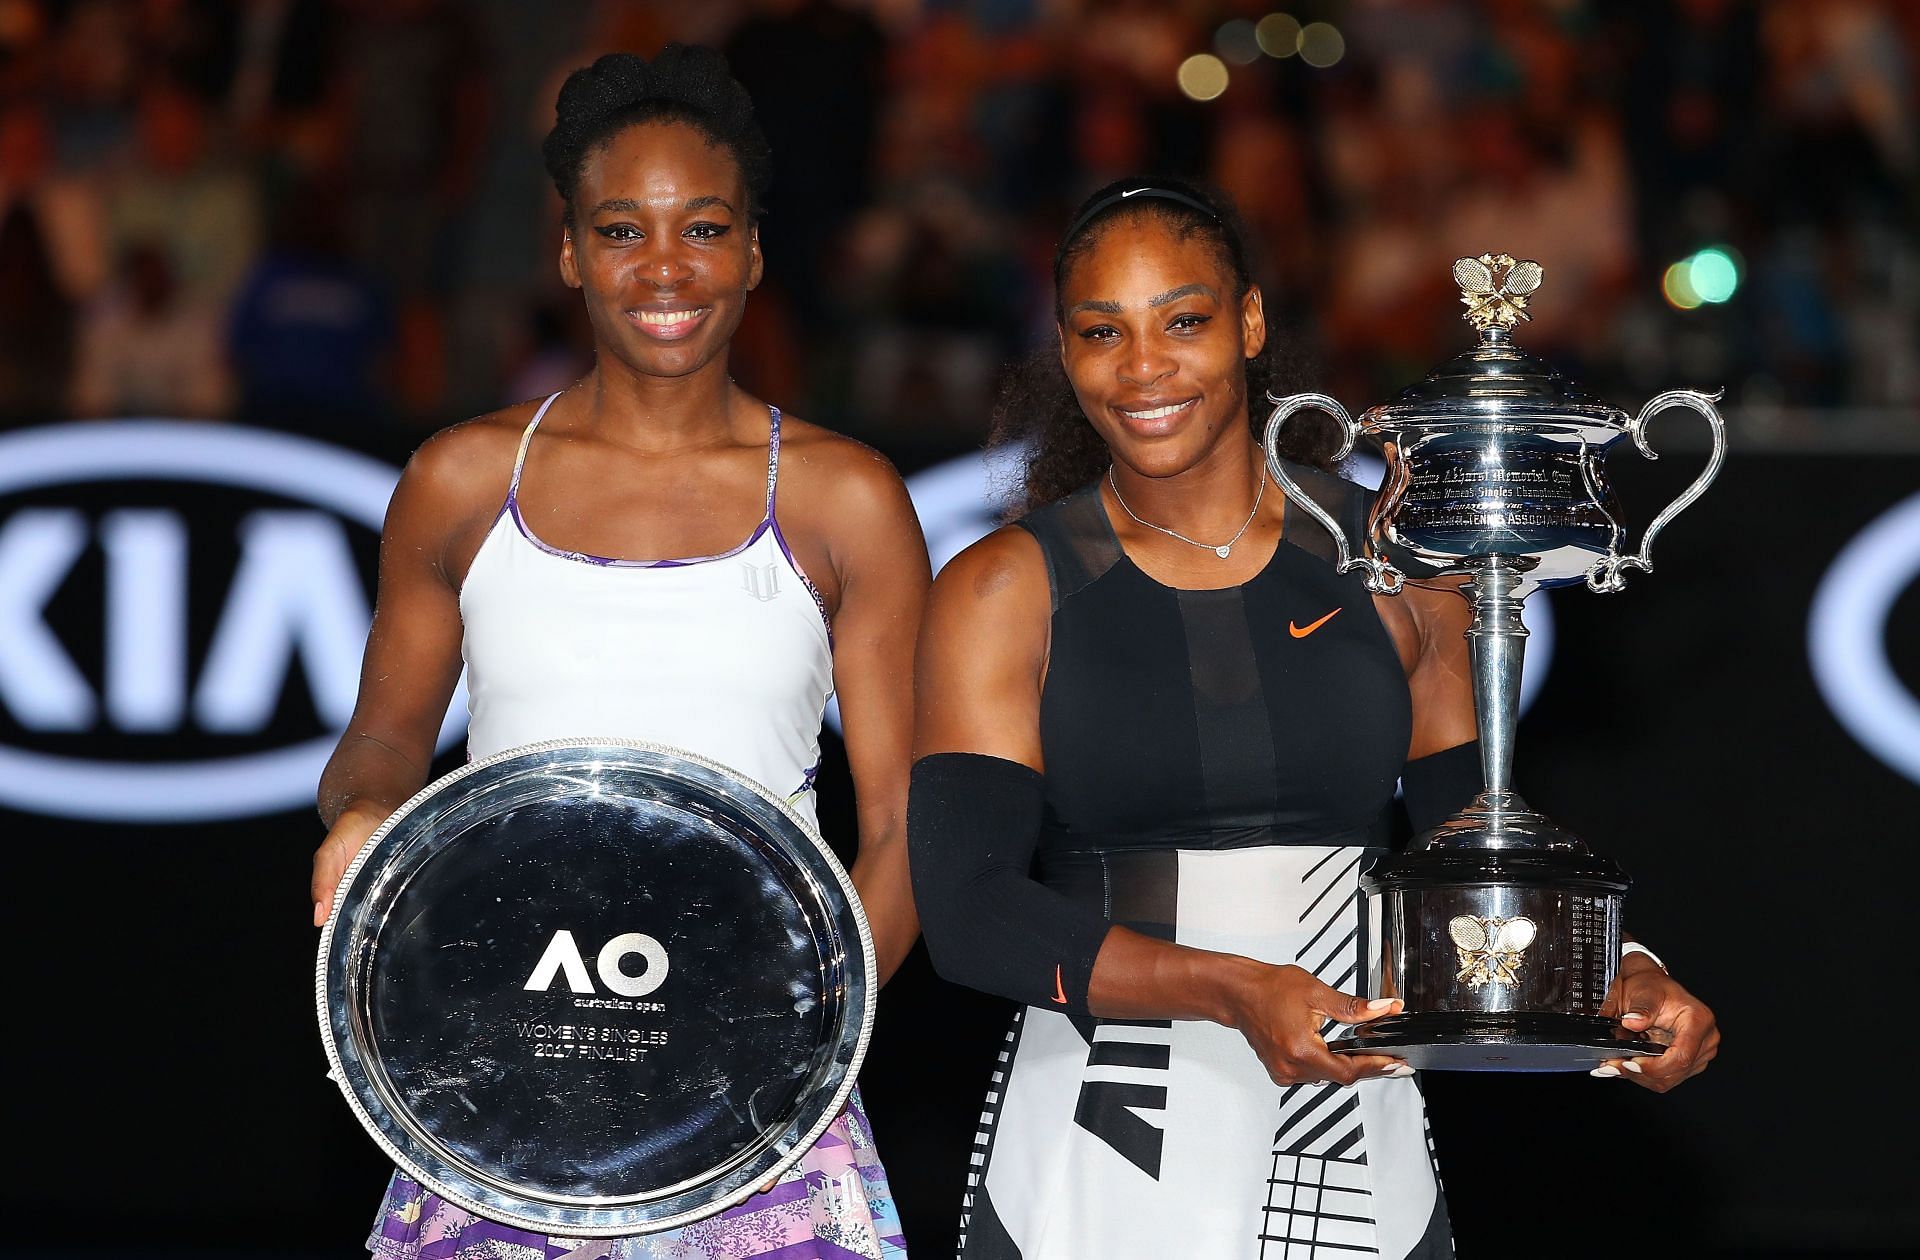 Venus Williams [left] and Serena Williams with their respective Australian Open 2017 trophies